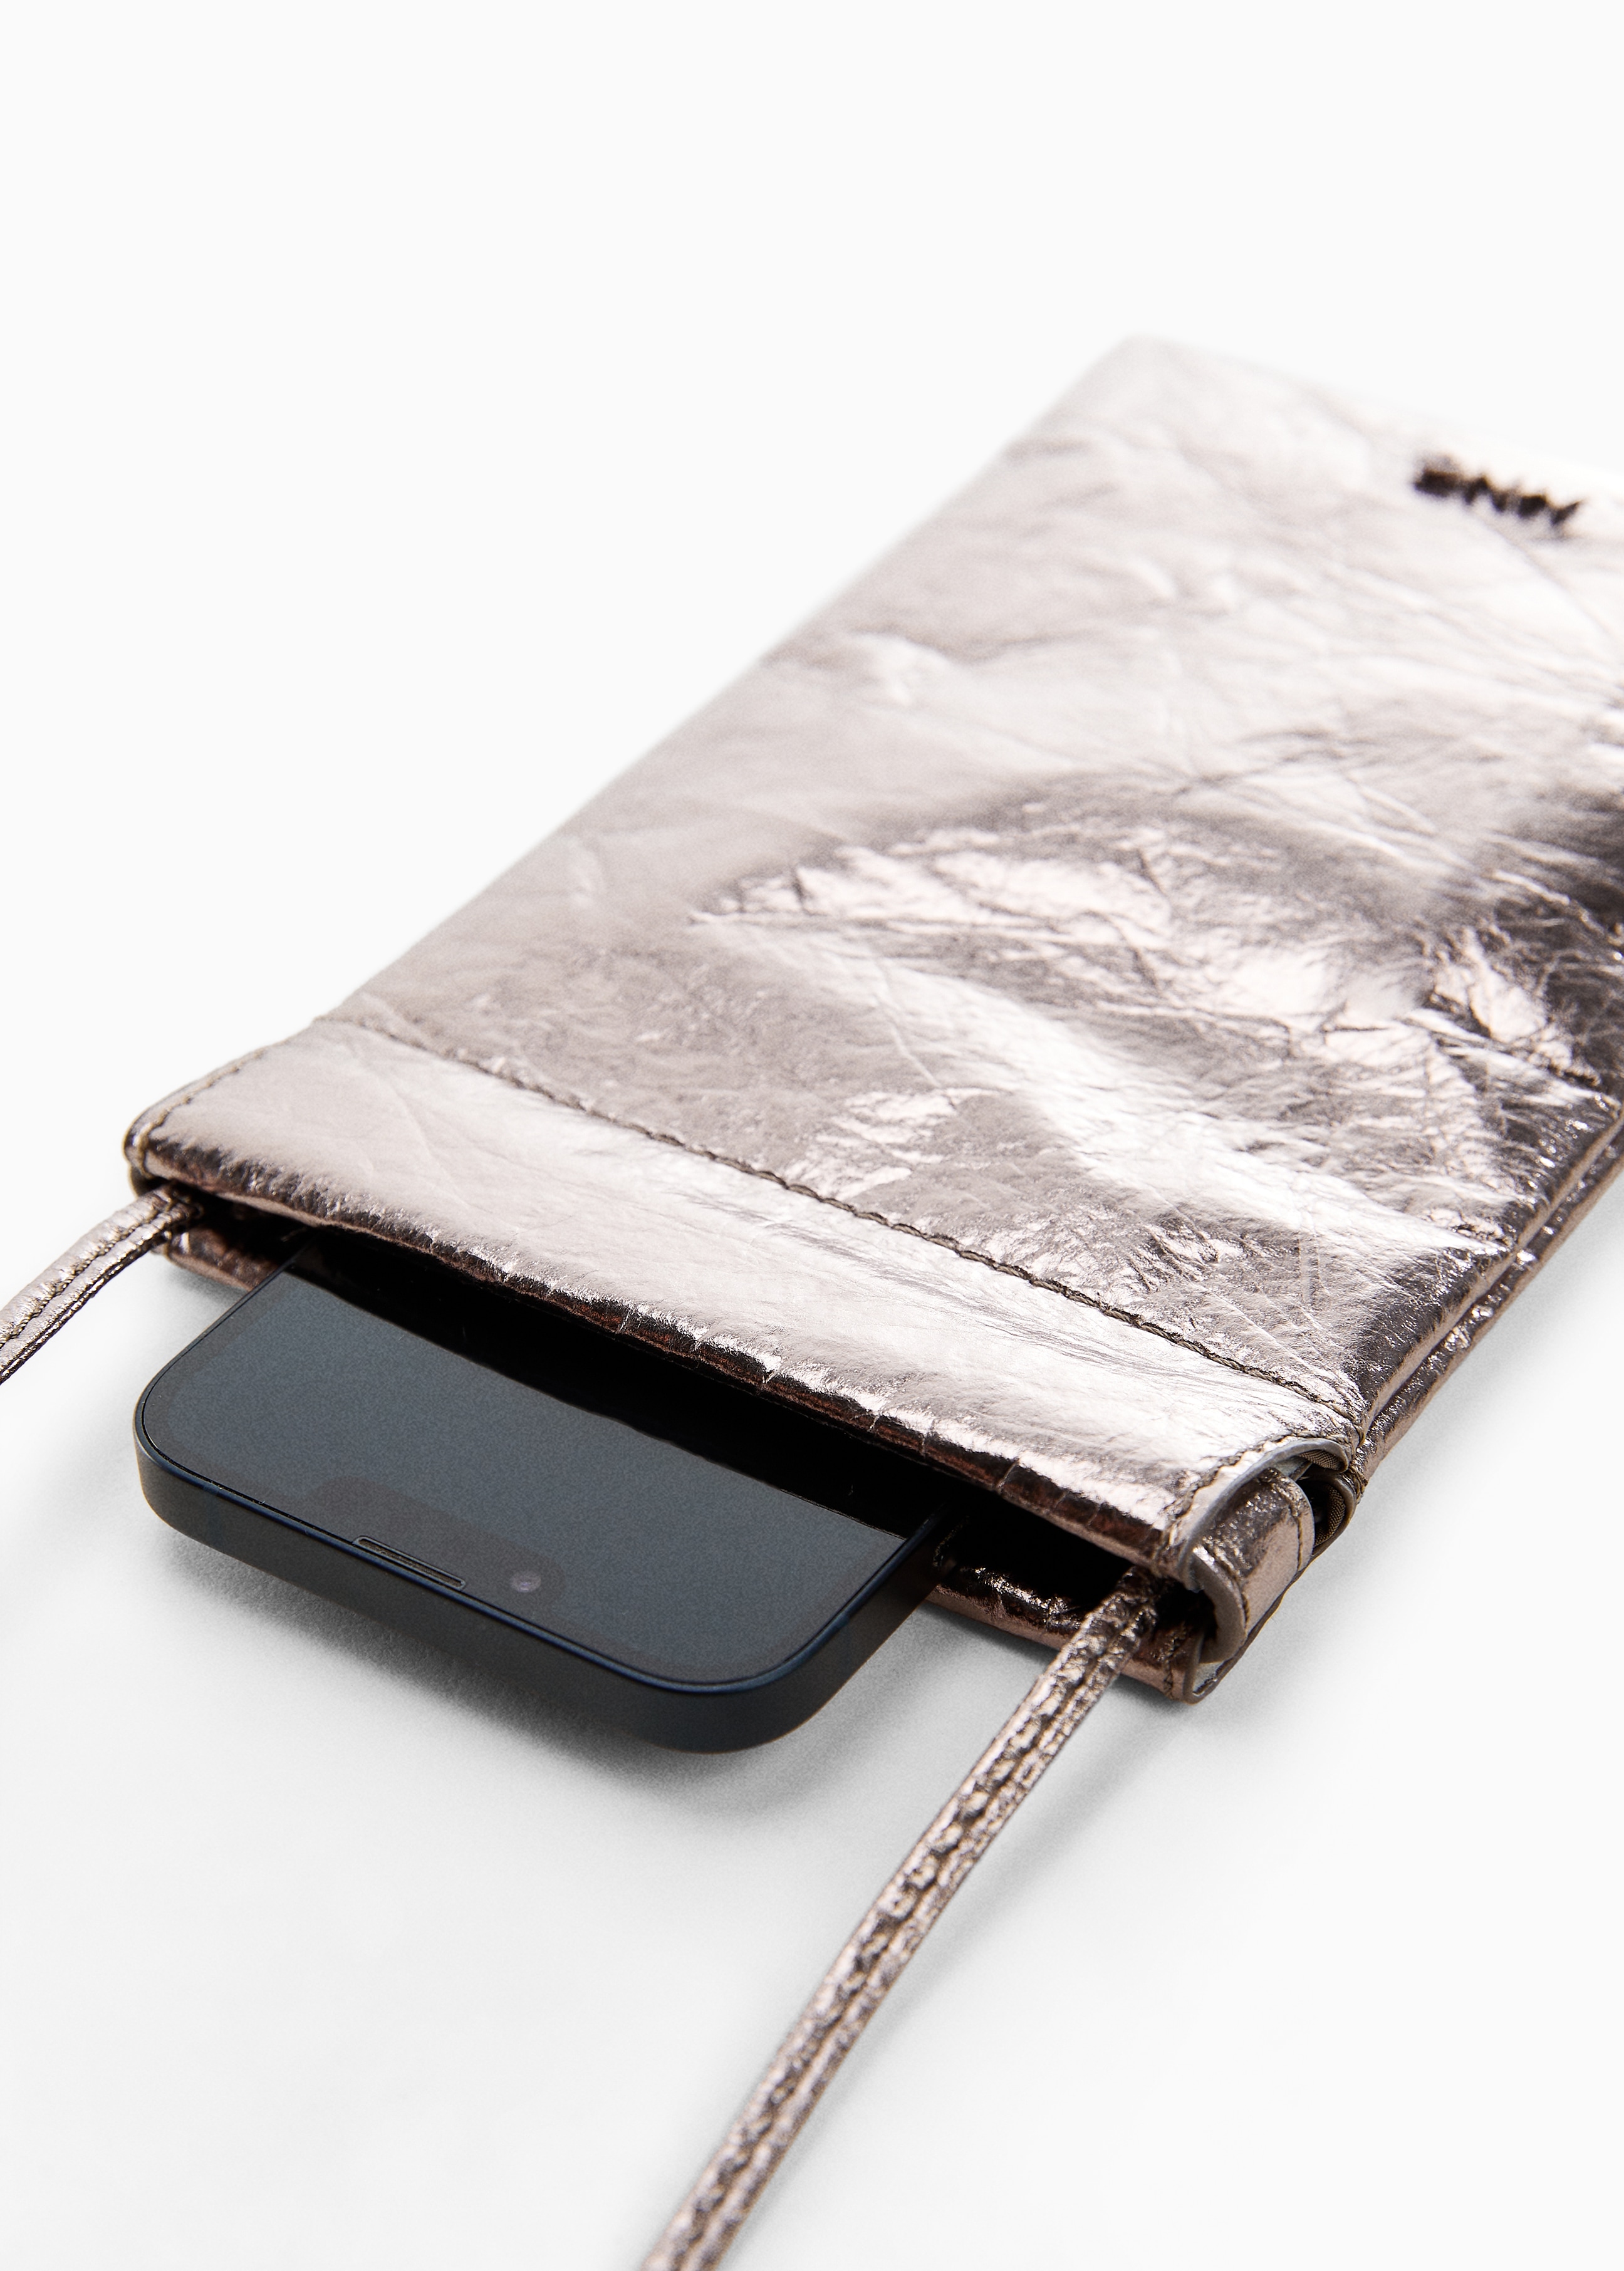 Metal mobile case - Details of the article 2